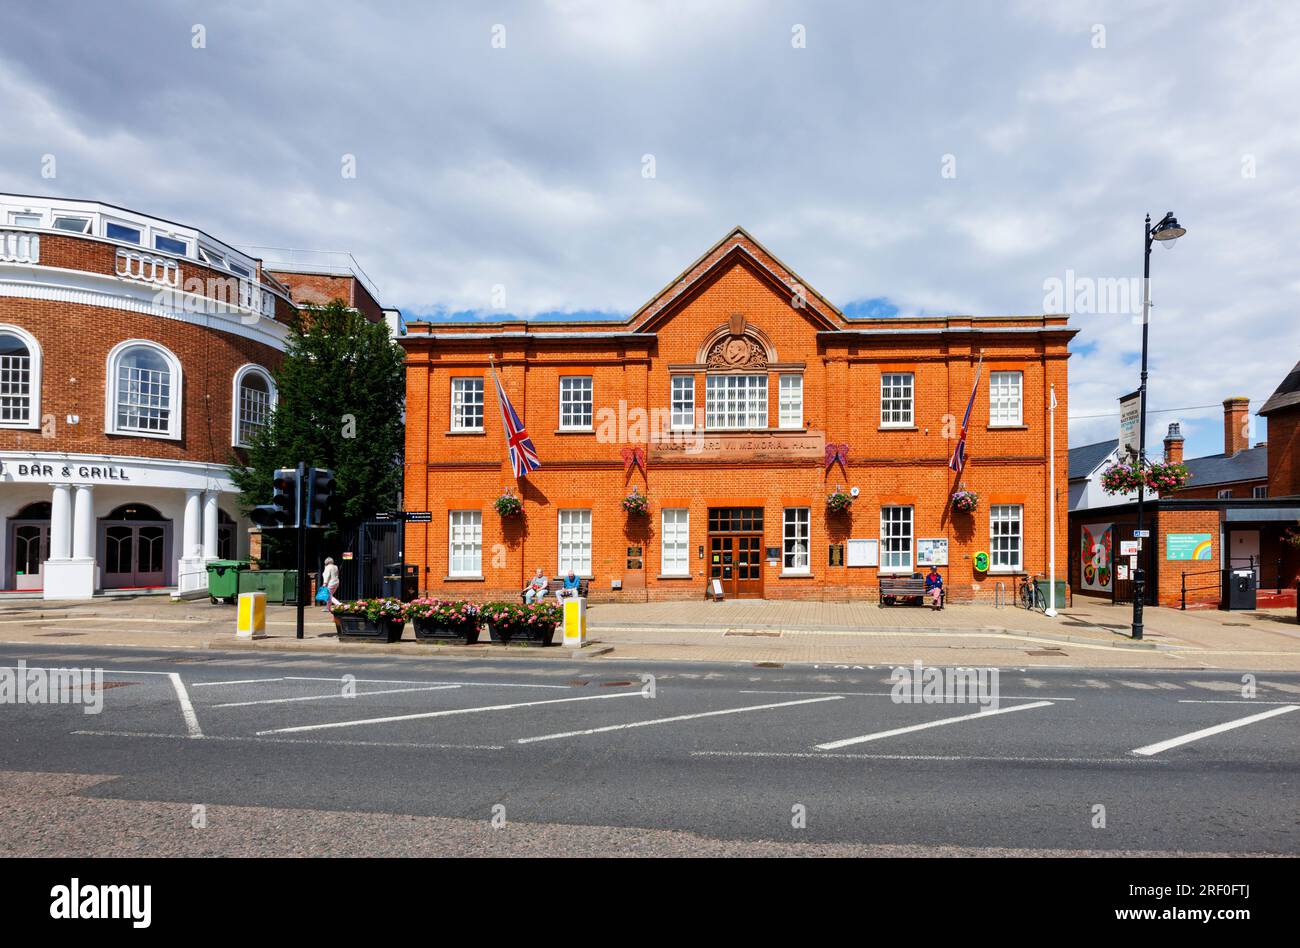 The King Edward VII Memorial Hall in High Street, Newmarket, a market town in the West Suffolk district of Suffolk, east England Stock Photo